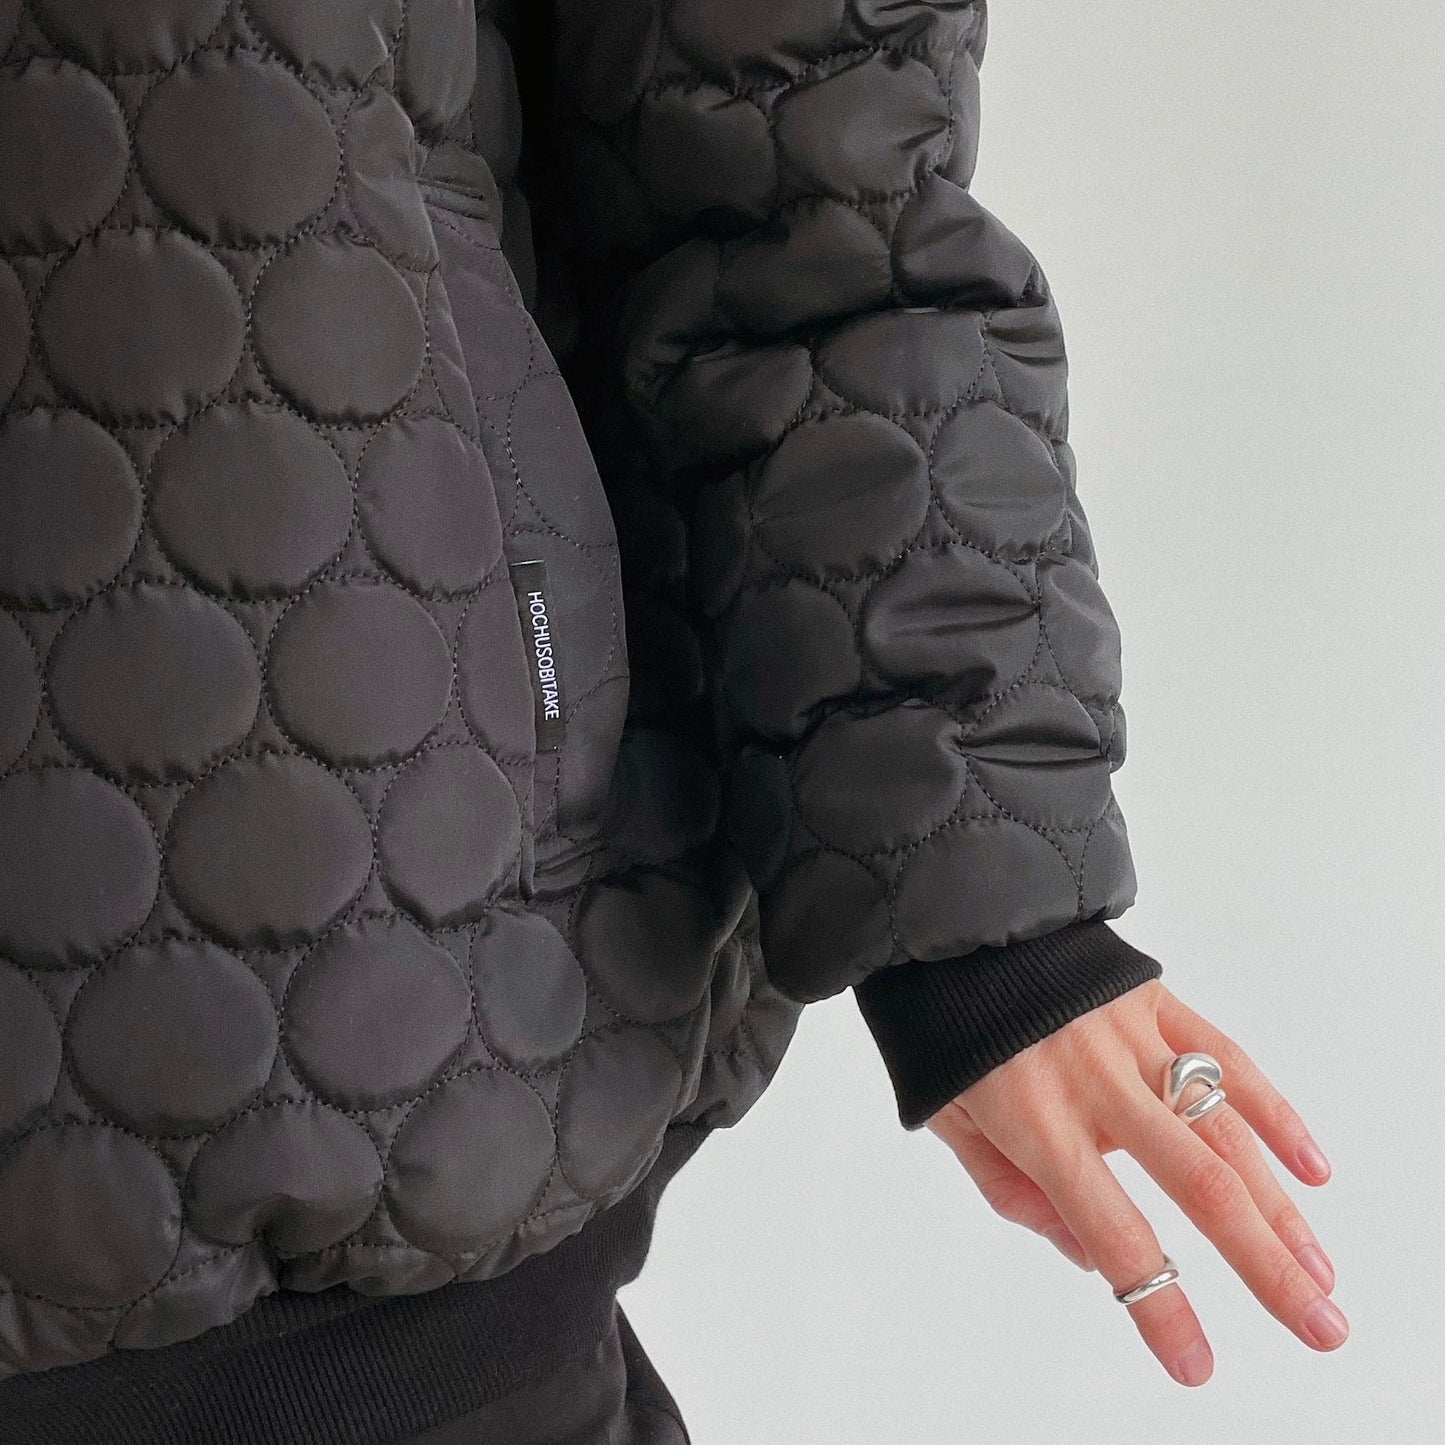 Demi-season doublesided quilted bomber jacket in black/emerald  color